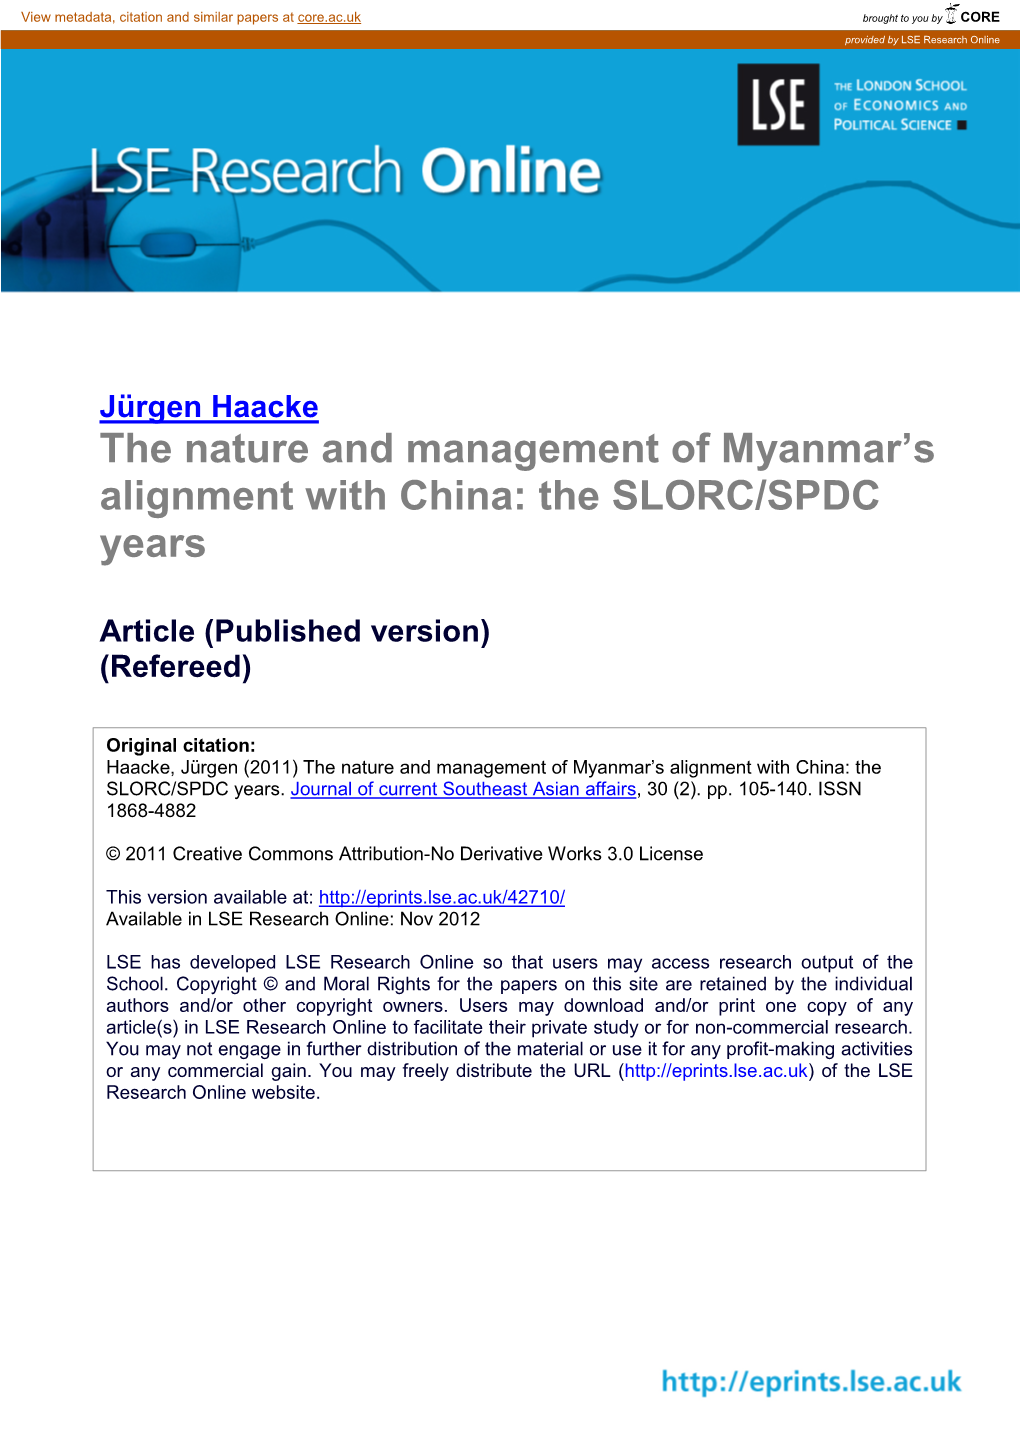 The Nature and Management of Myanmar's Alignment with China